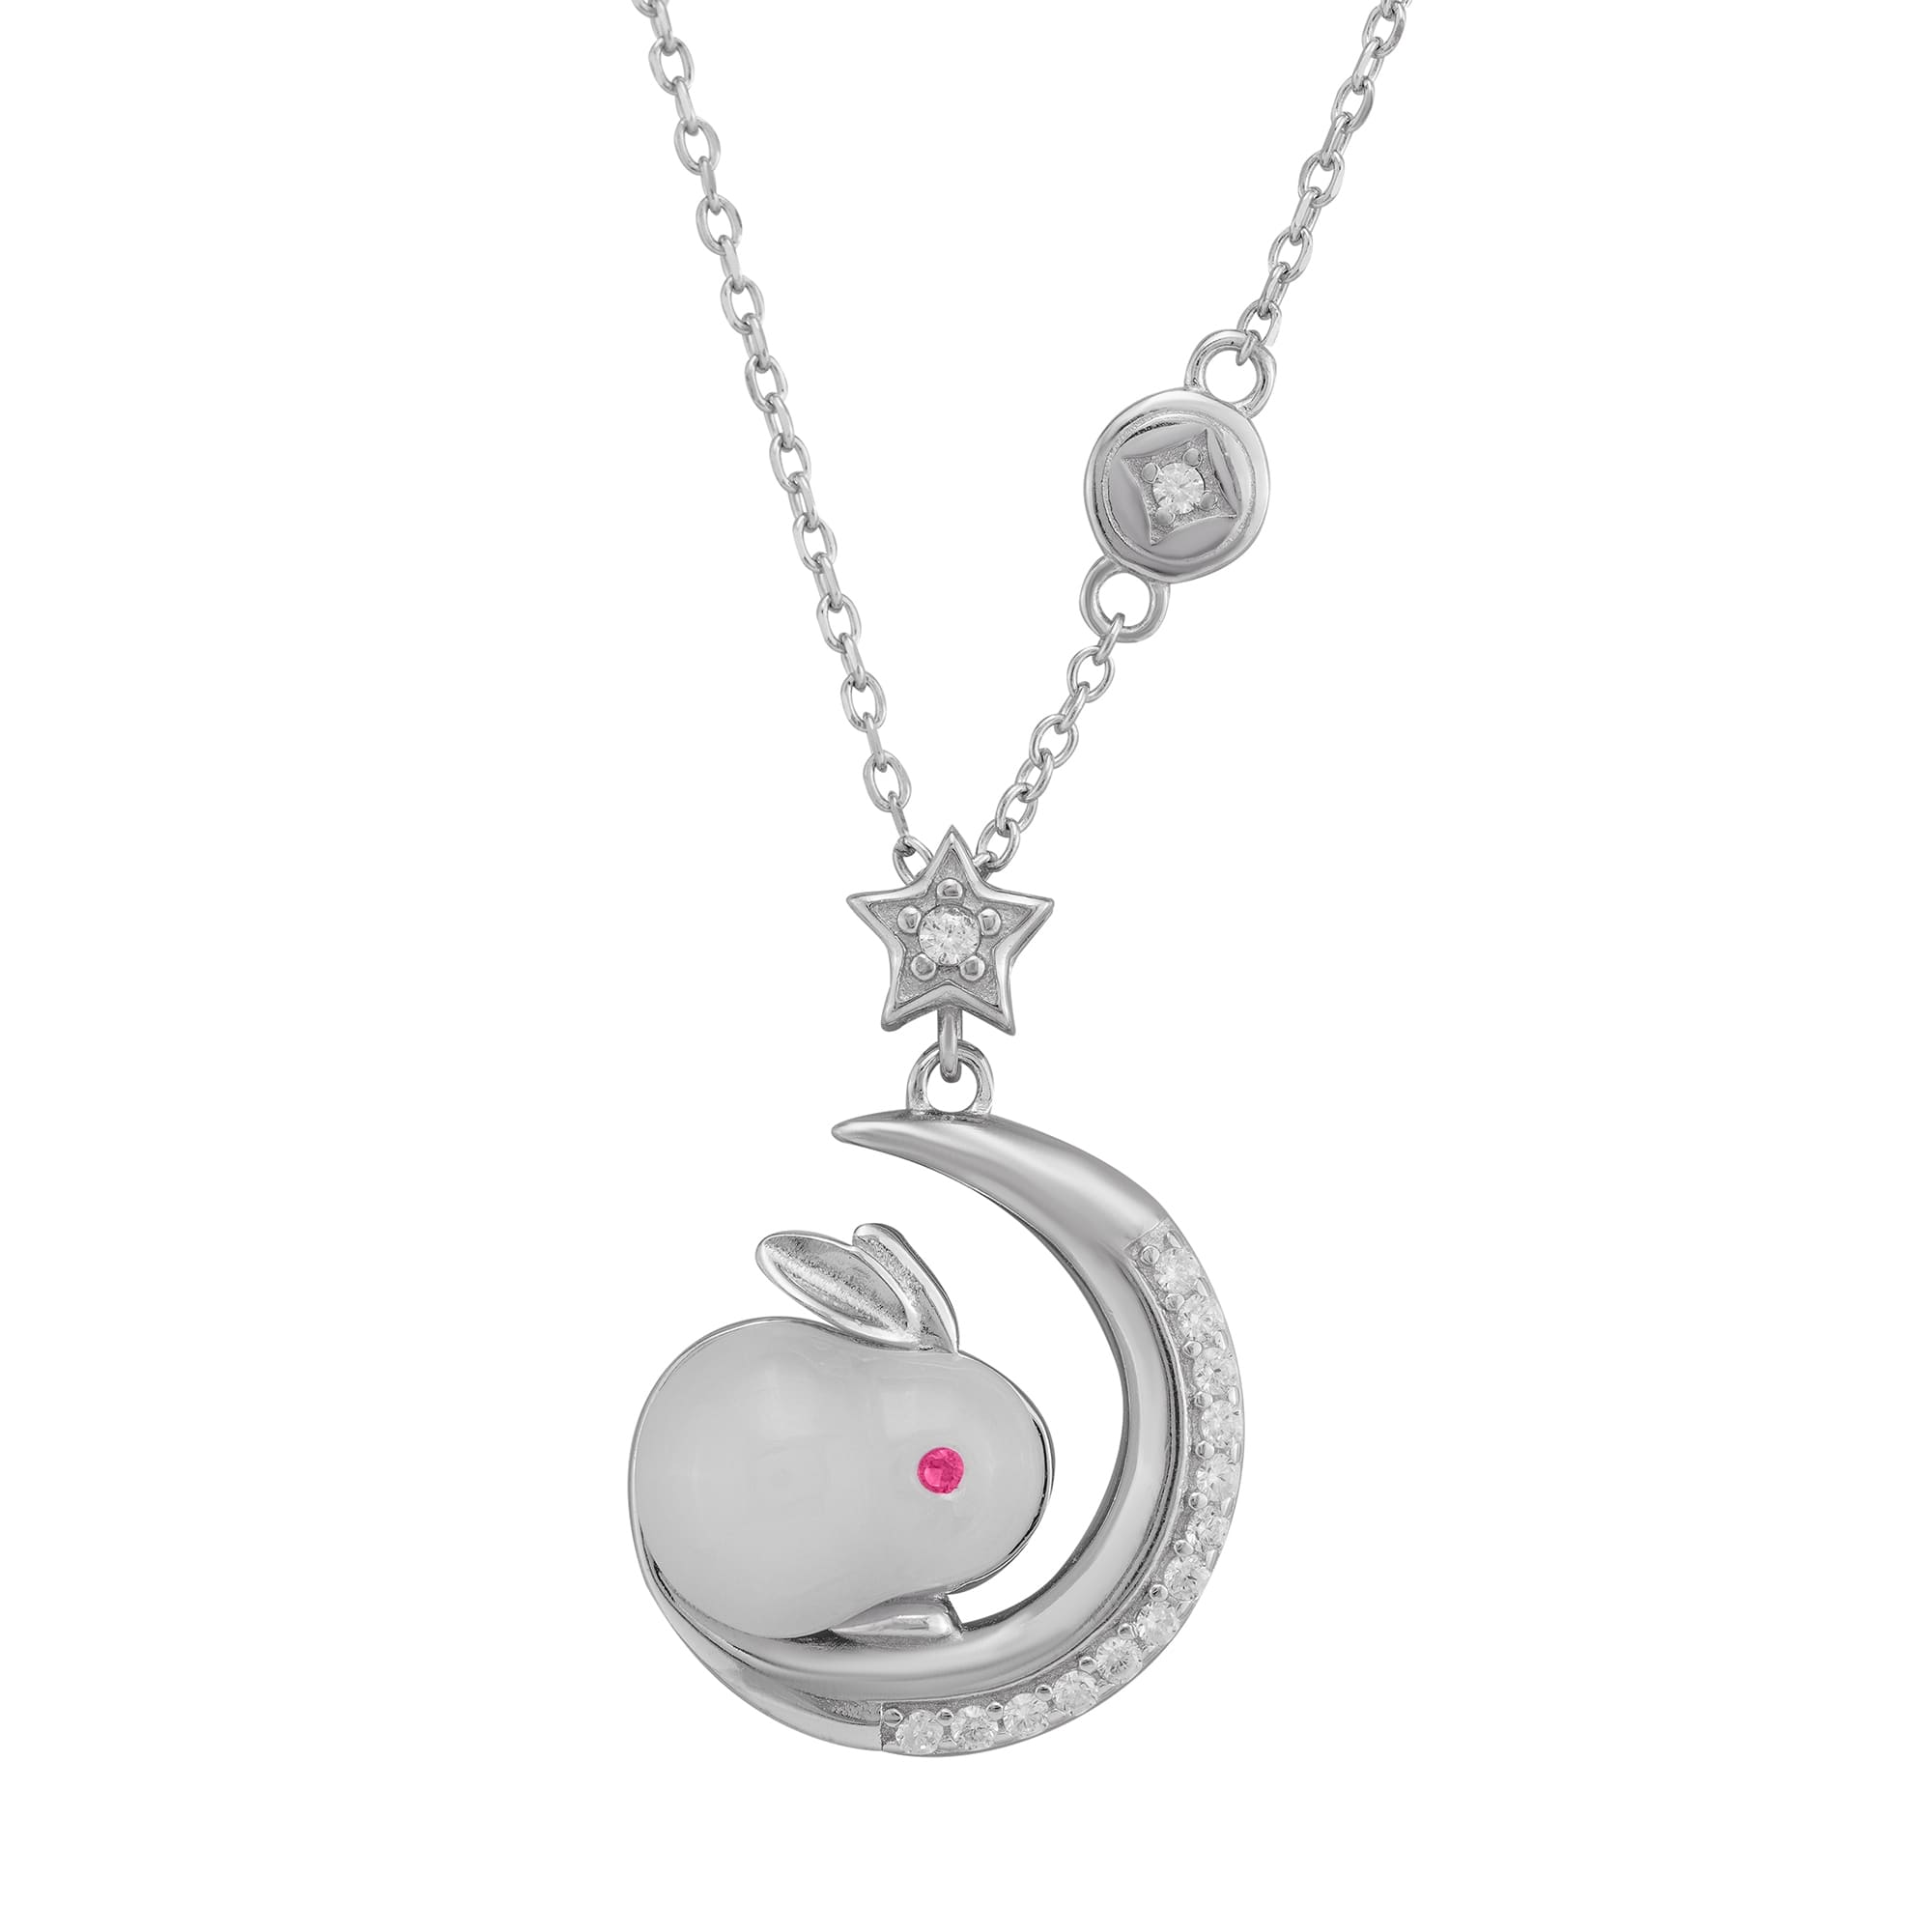 Jade Rabbit Setting On The Moon Silver Pendant Chain Made With CZ Diamond